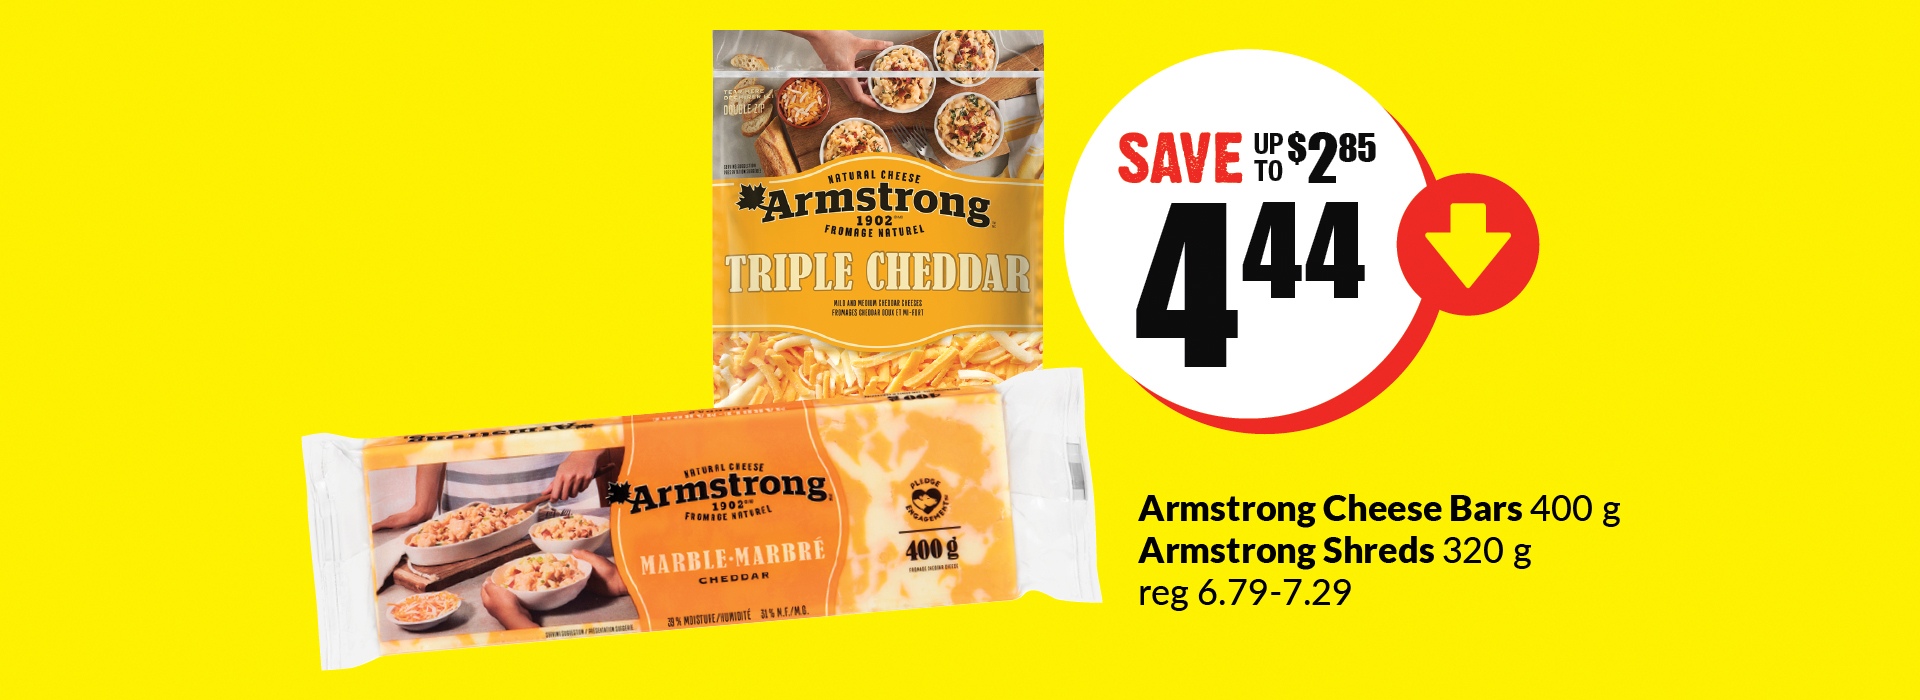 Armstrong cheese bars